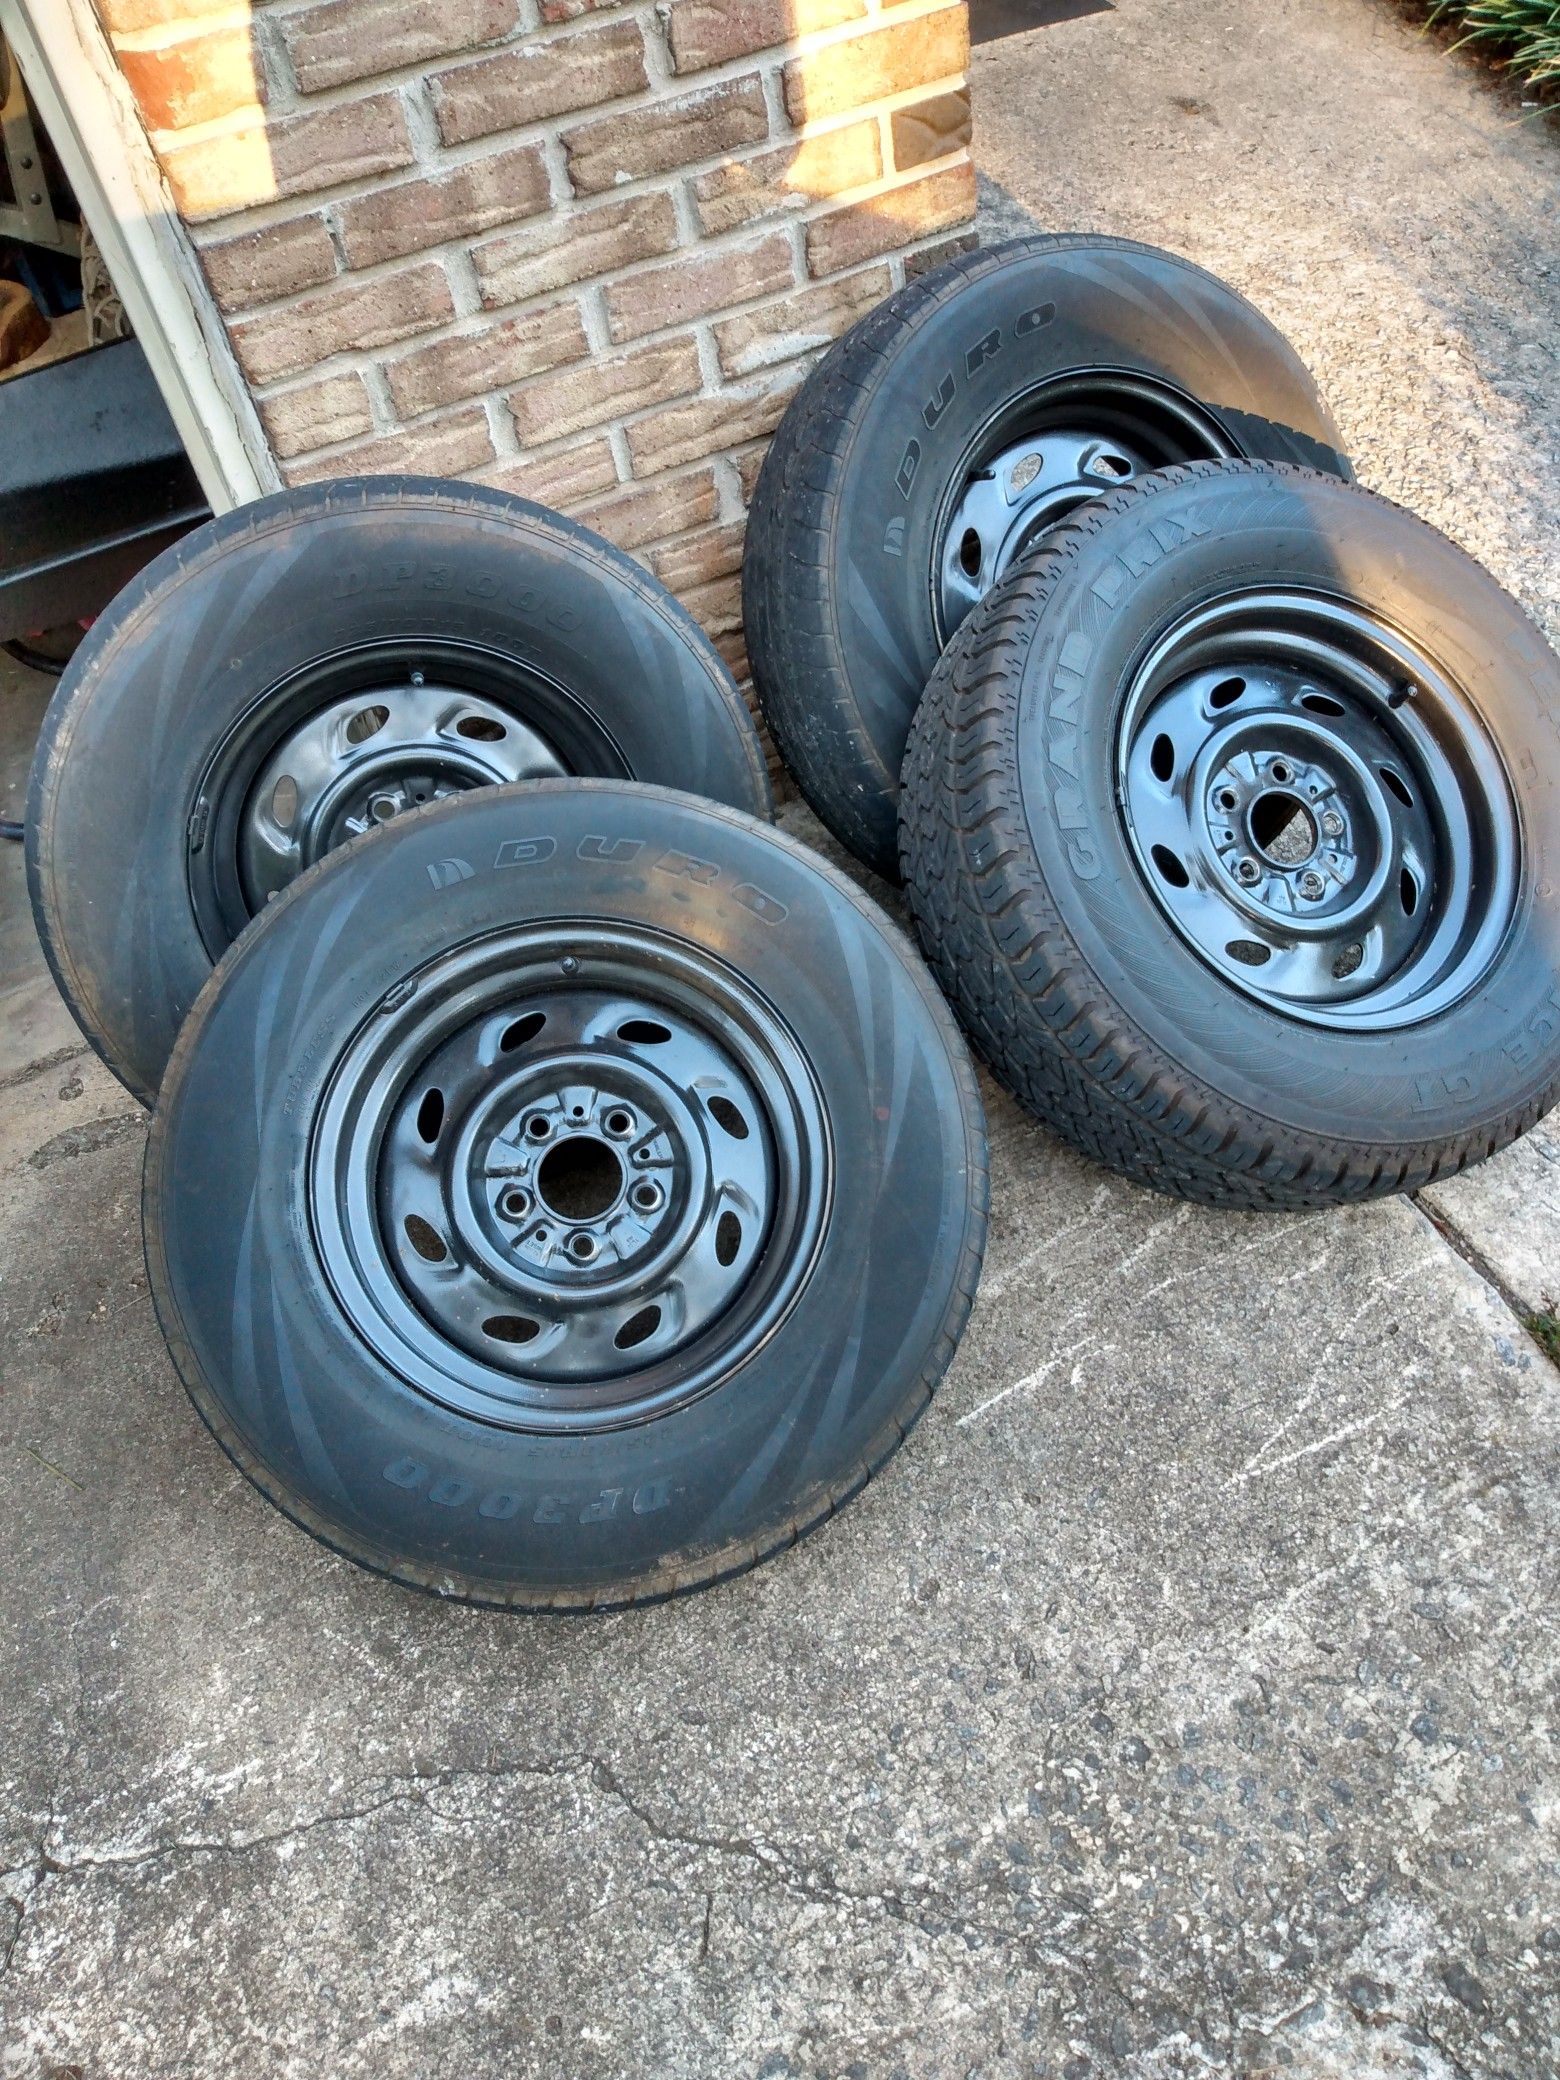 225/70/15 tires and rims